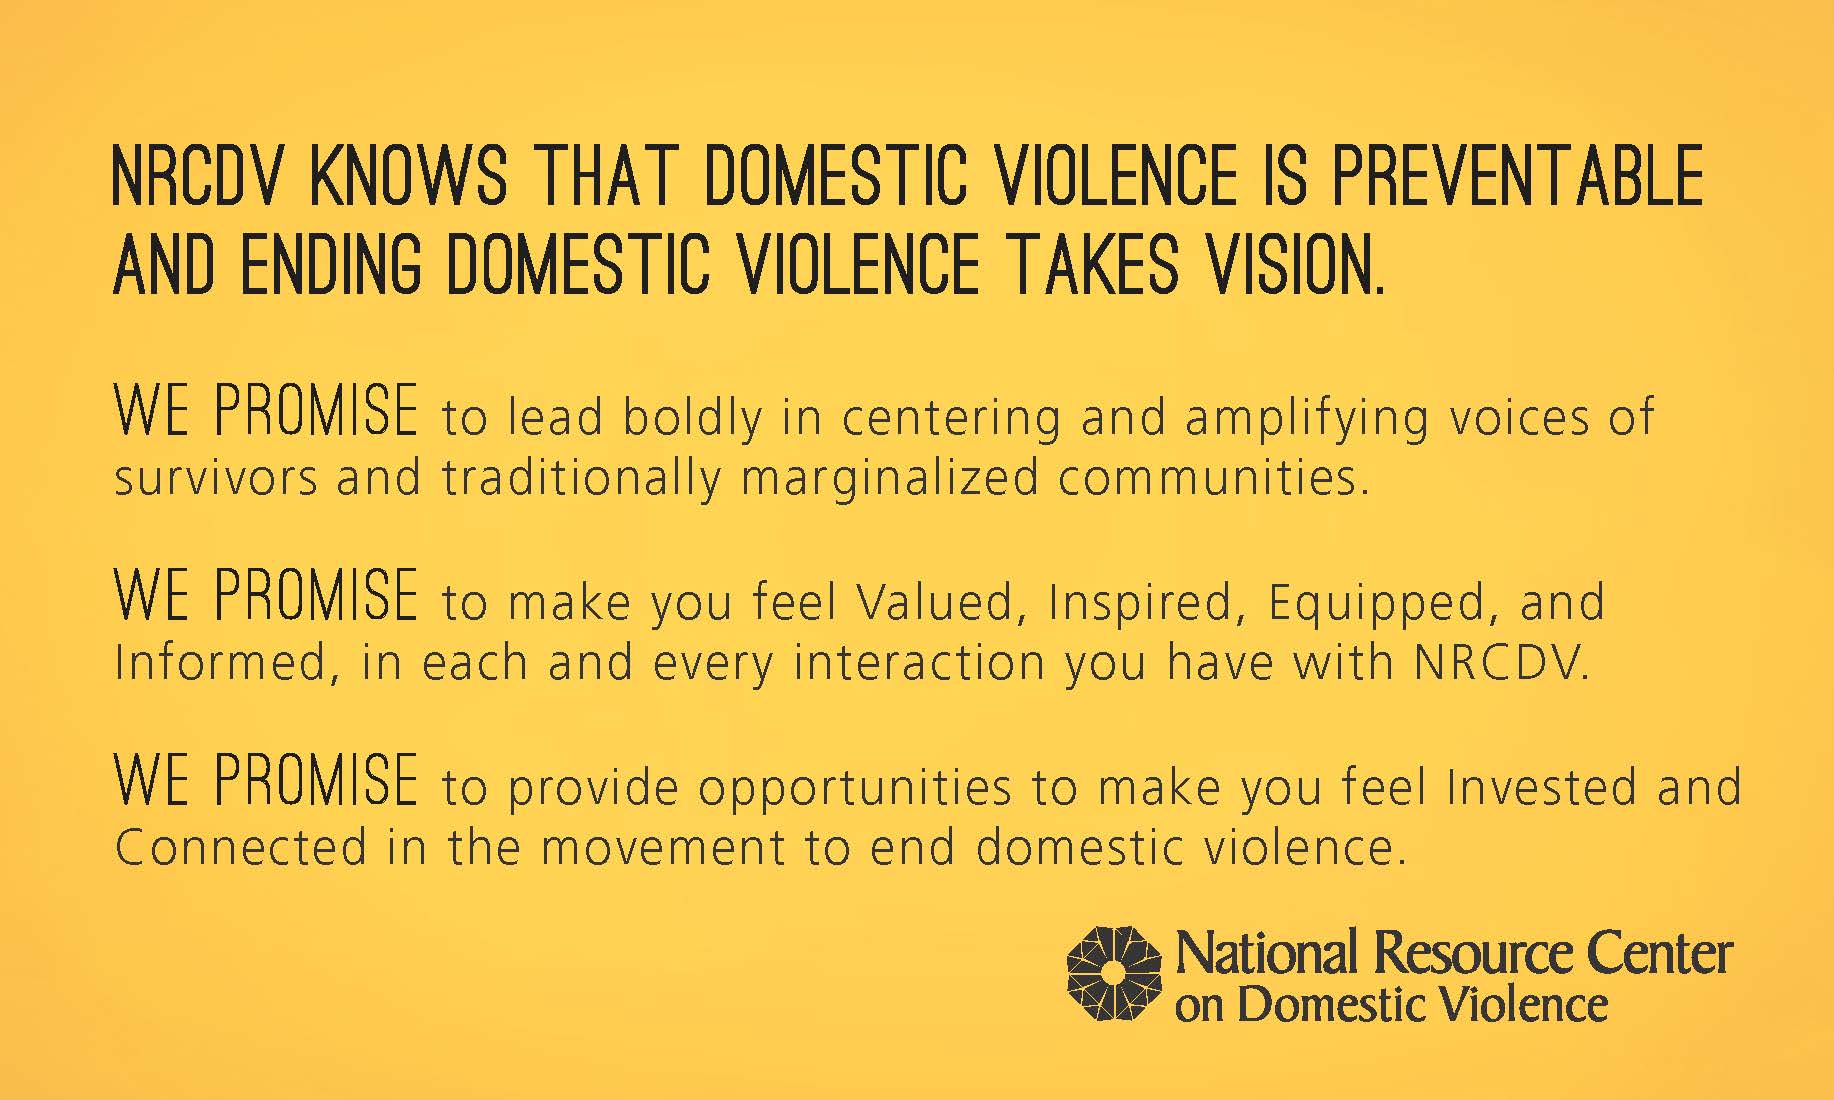 Nrcdv knows that domestic violence is preventable and ending domestic violence takes vision.